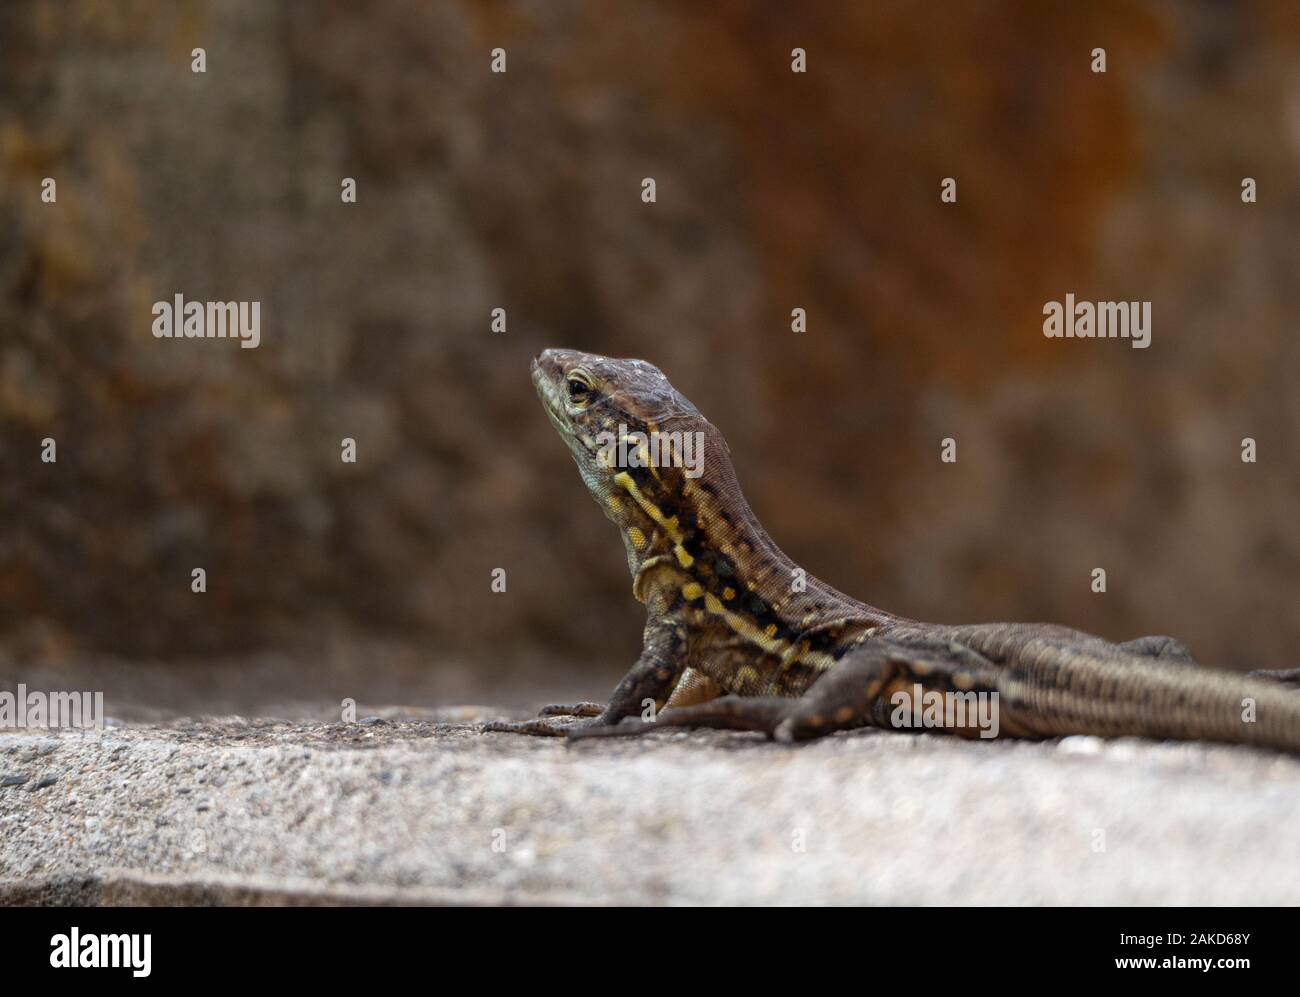 close up to lizard in a rock Stock Photo